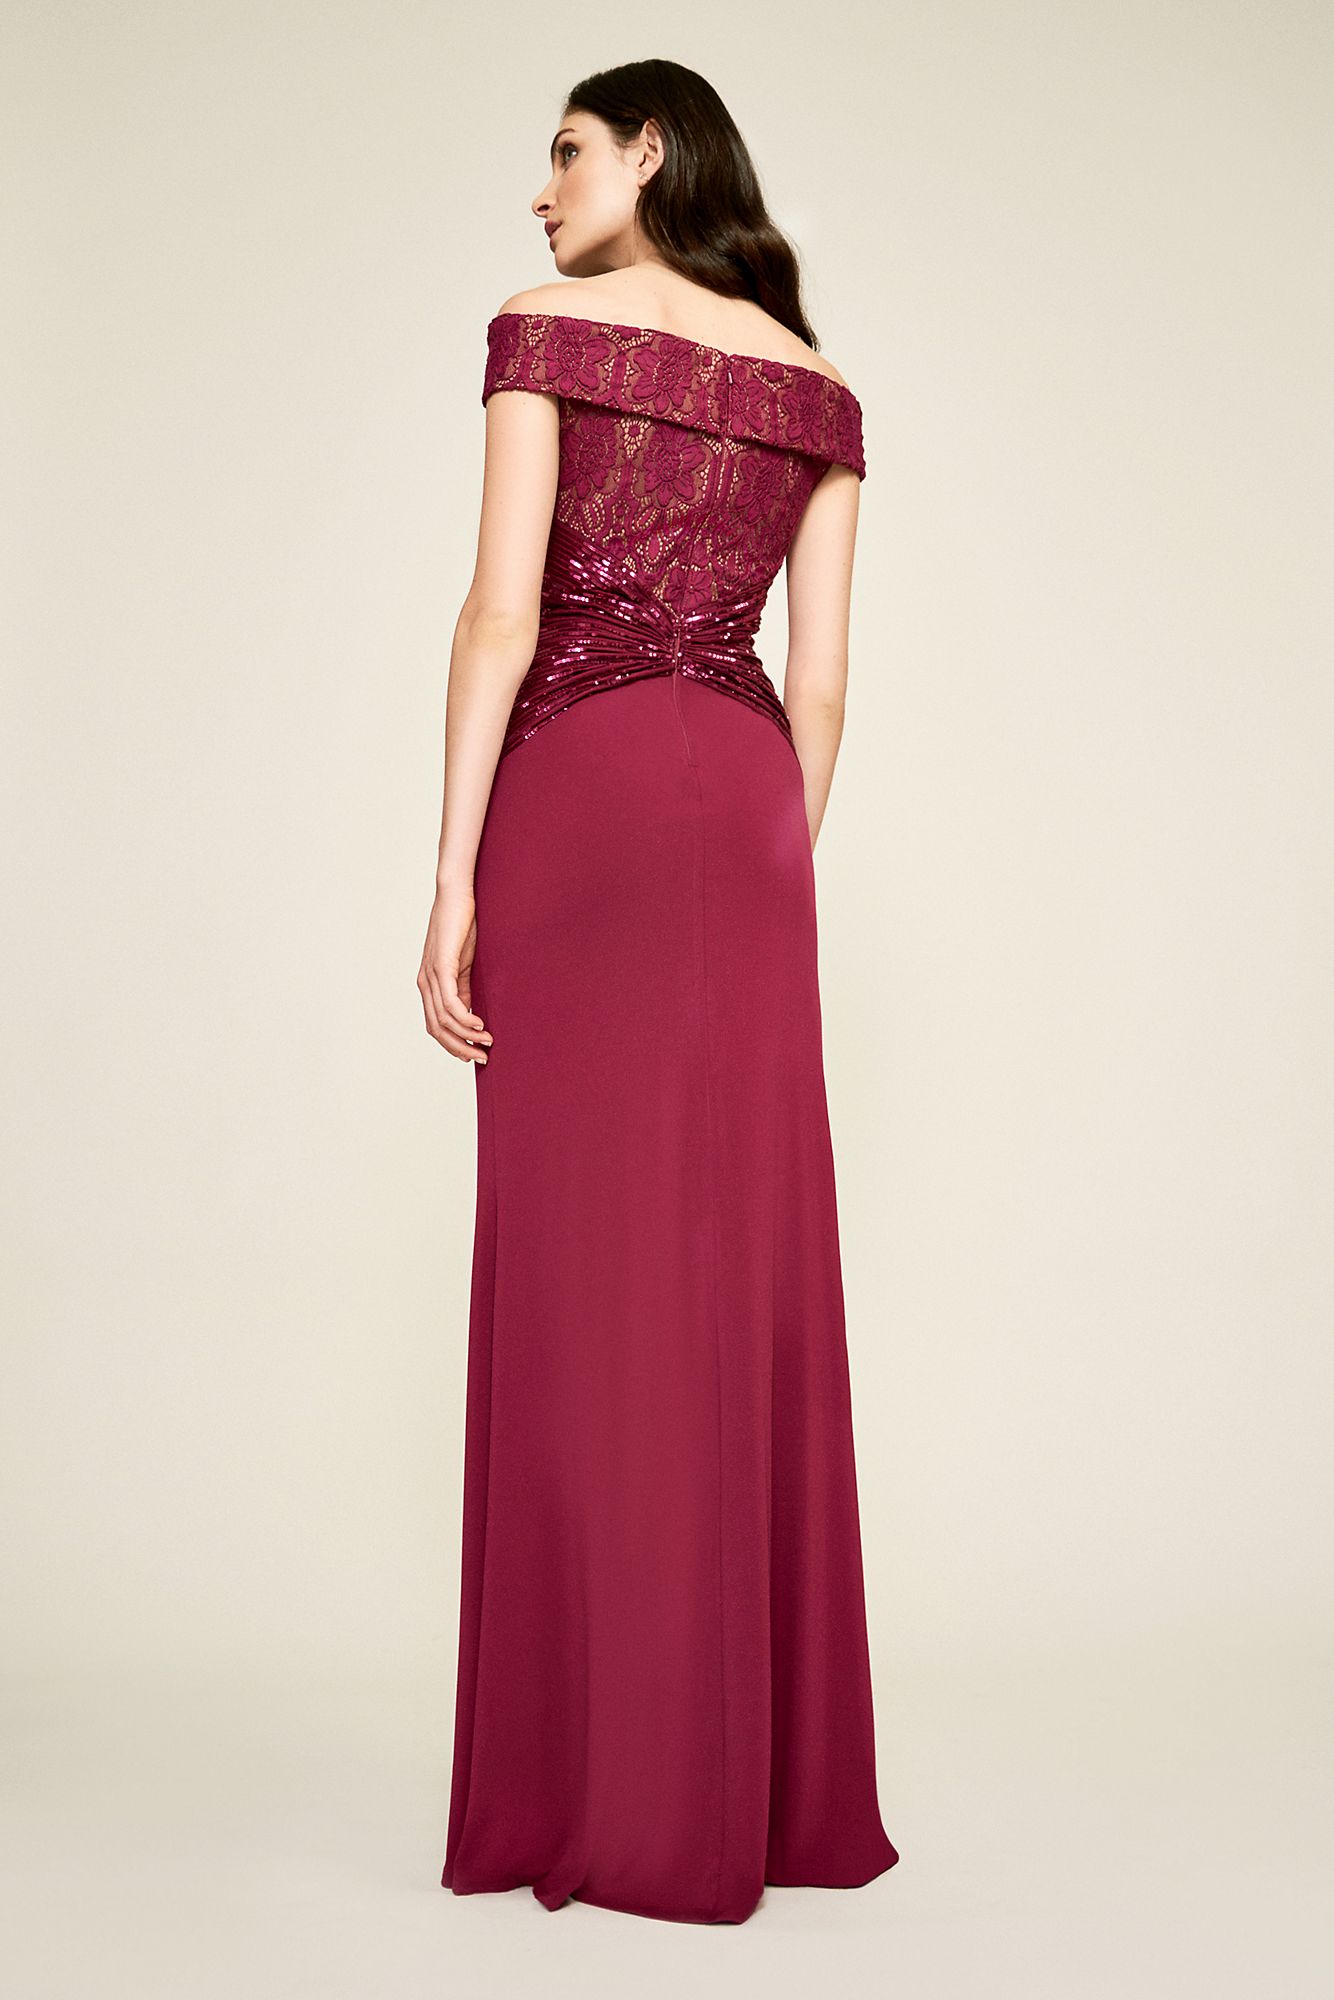 Long Off the Shoulder BGK18703L Style Lace and Jersey Occasion Dress by Tadashi Shoji